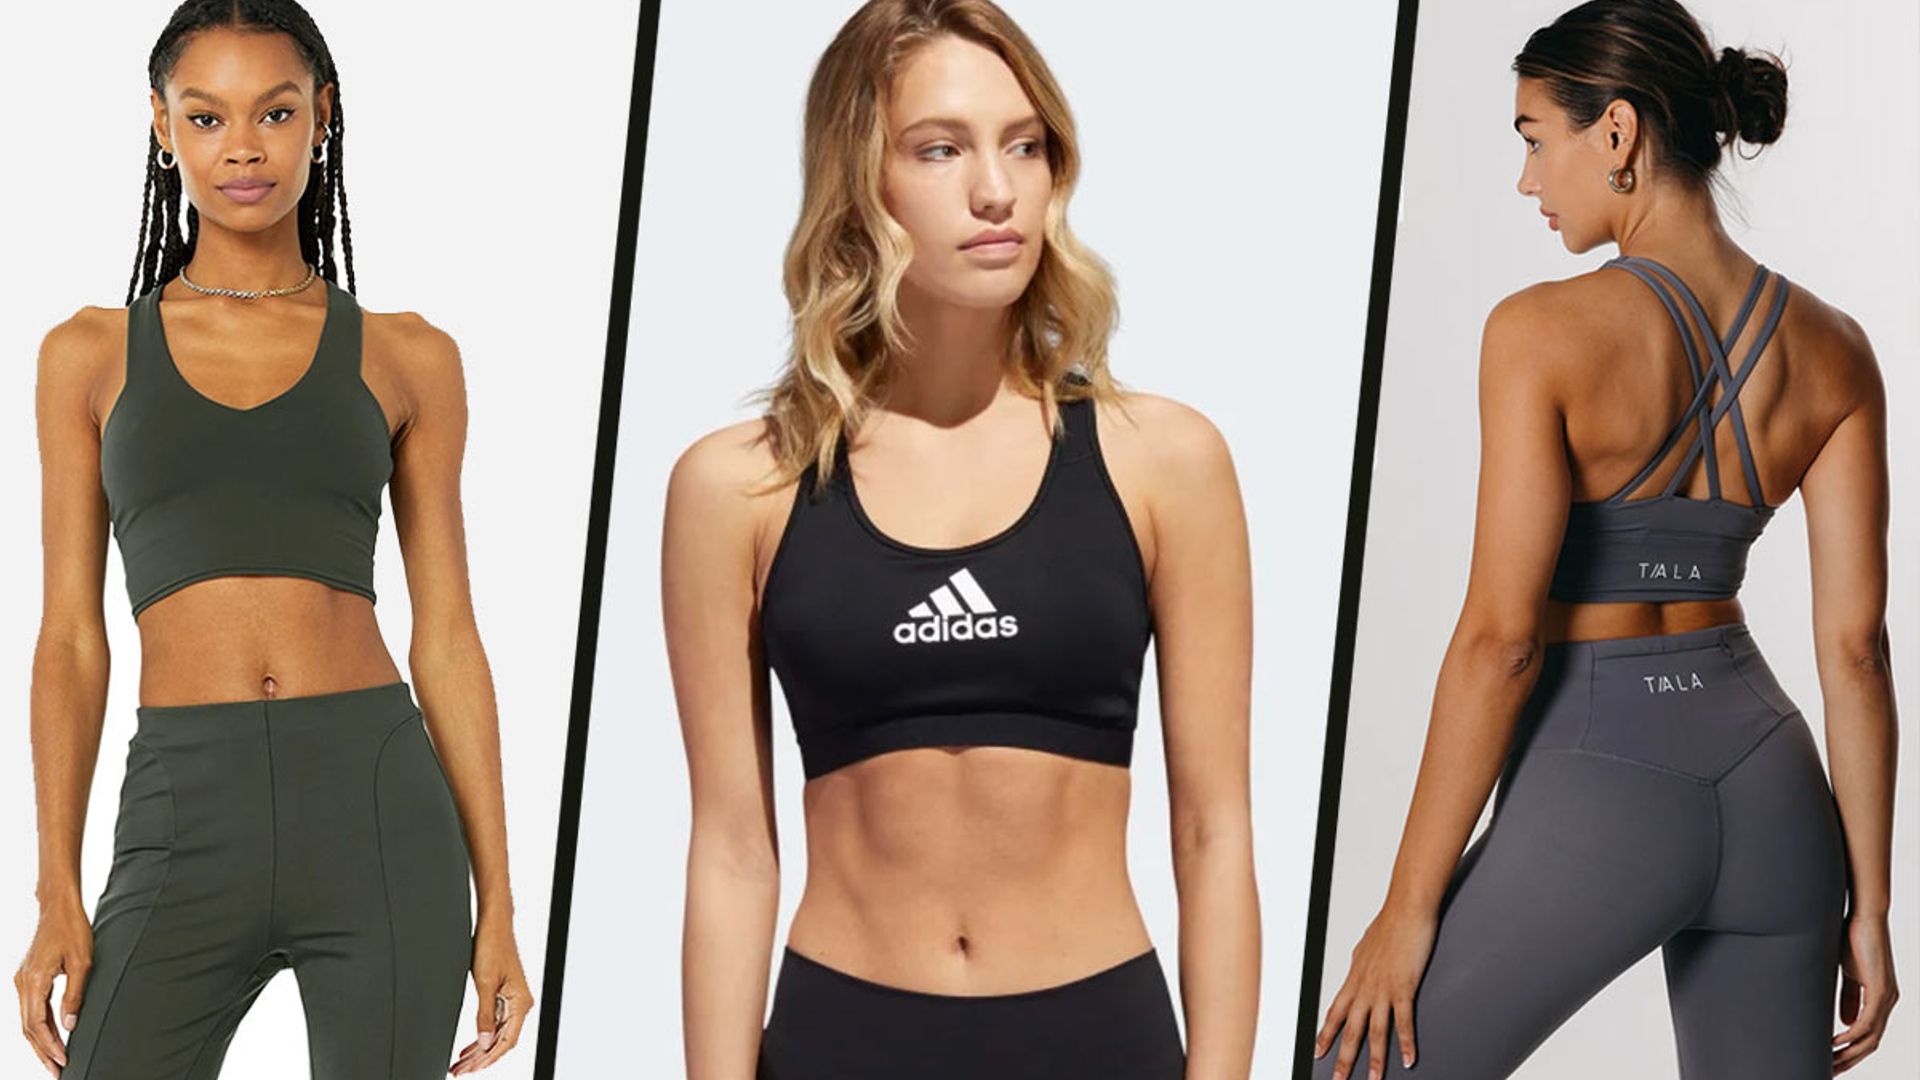 11 best sports bras with the best reviews 2022: From Marks